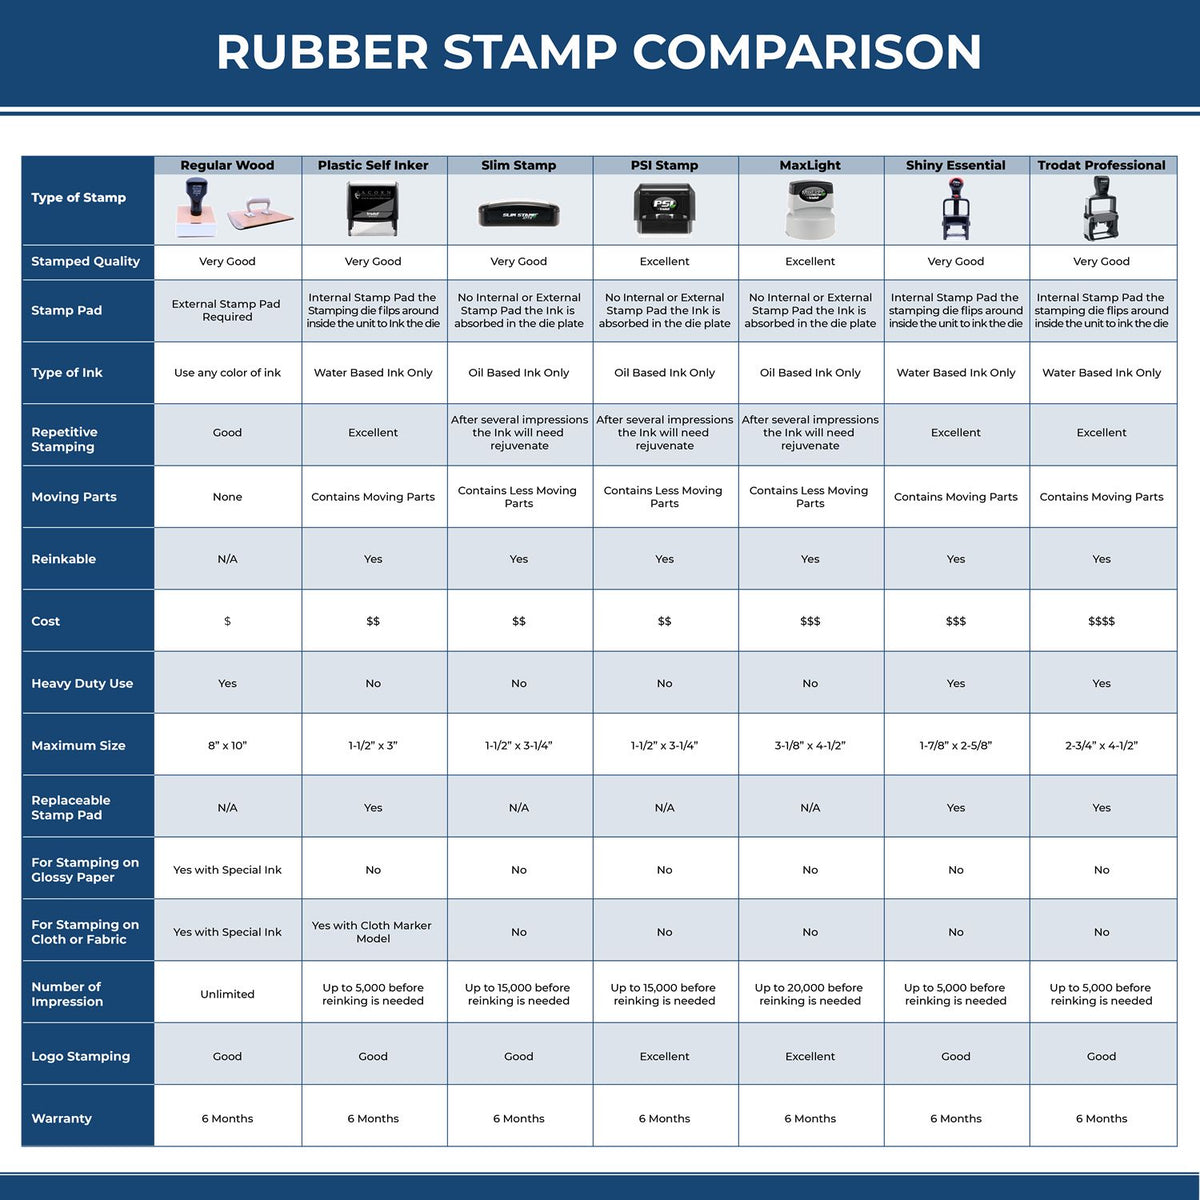 A comparison chart for the different types of mount models available for the MaxLight Premium Pre-Inked Virginia State Seal Notarial Stamp.